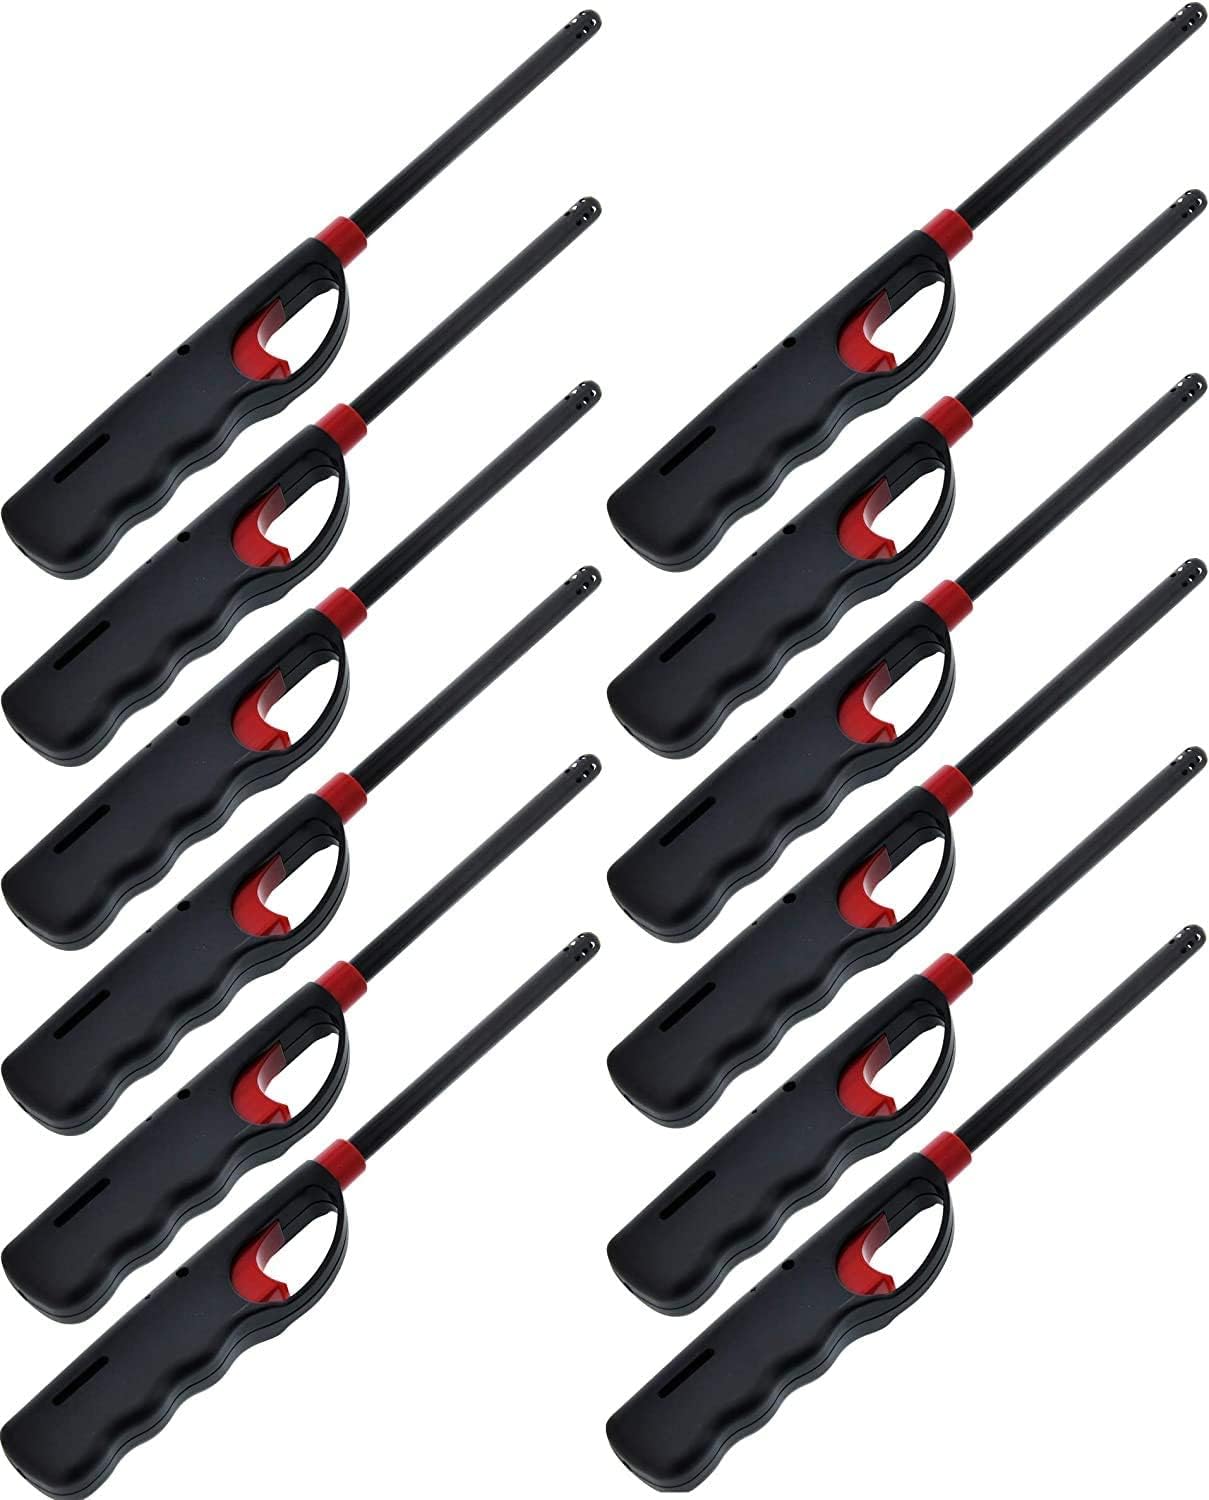 12 Pack - Fluid less BBQ Grill Click Flame Lighter